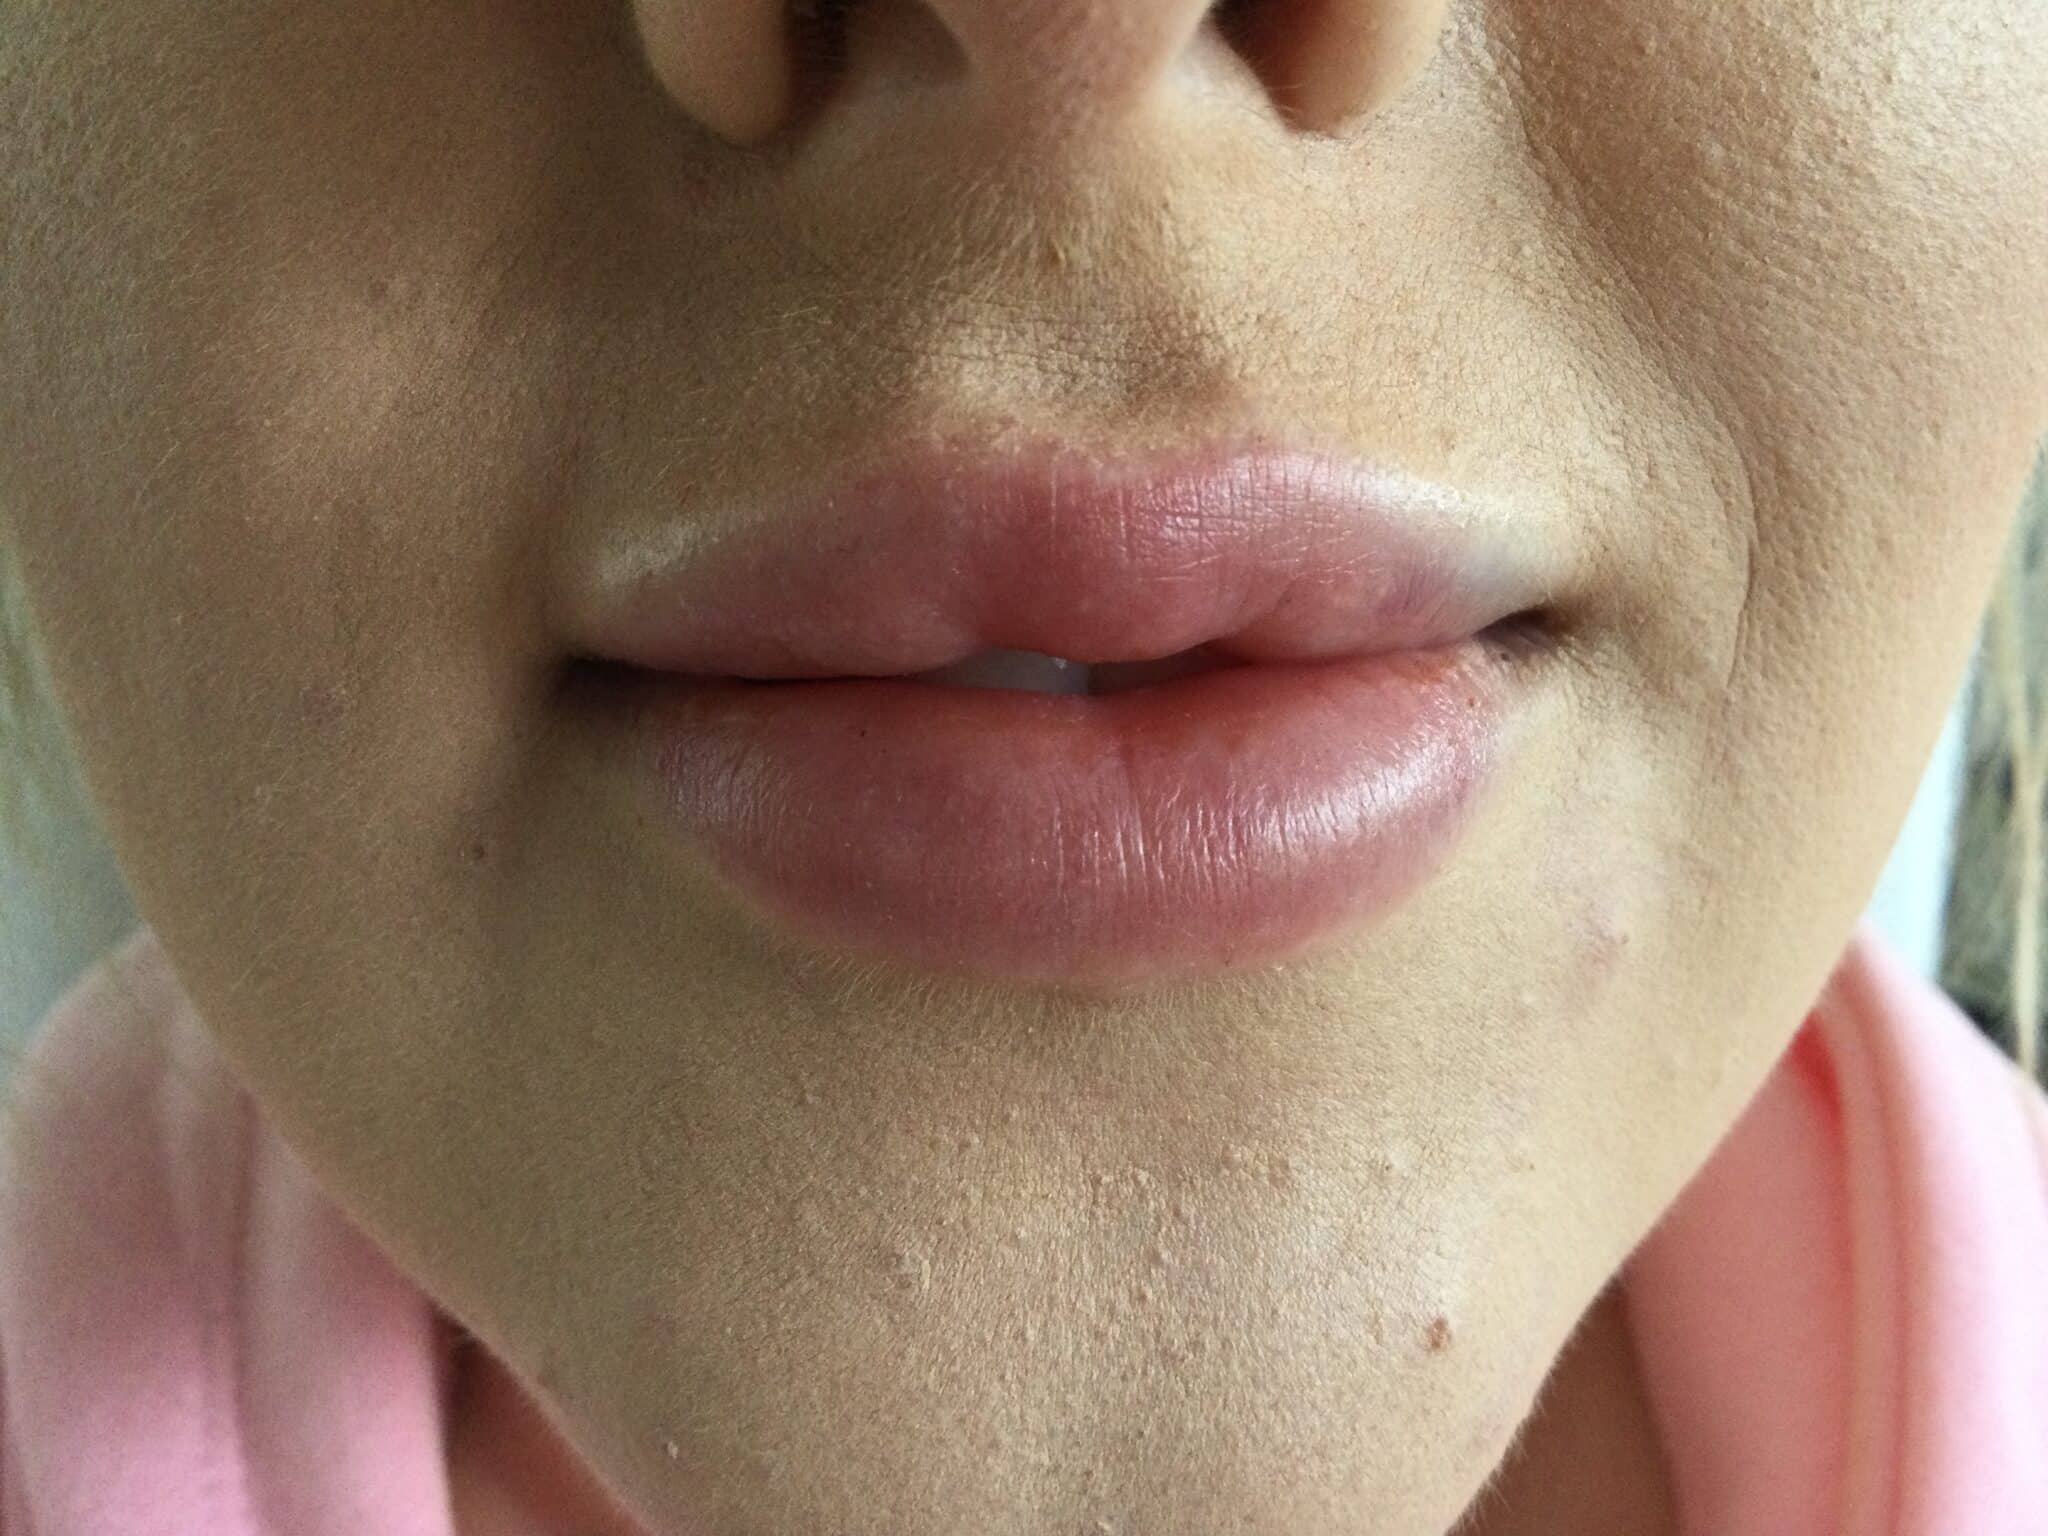 After 1 ml lip filler to plump the lips